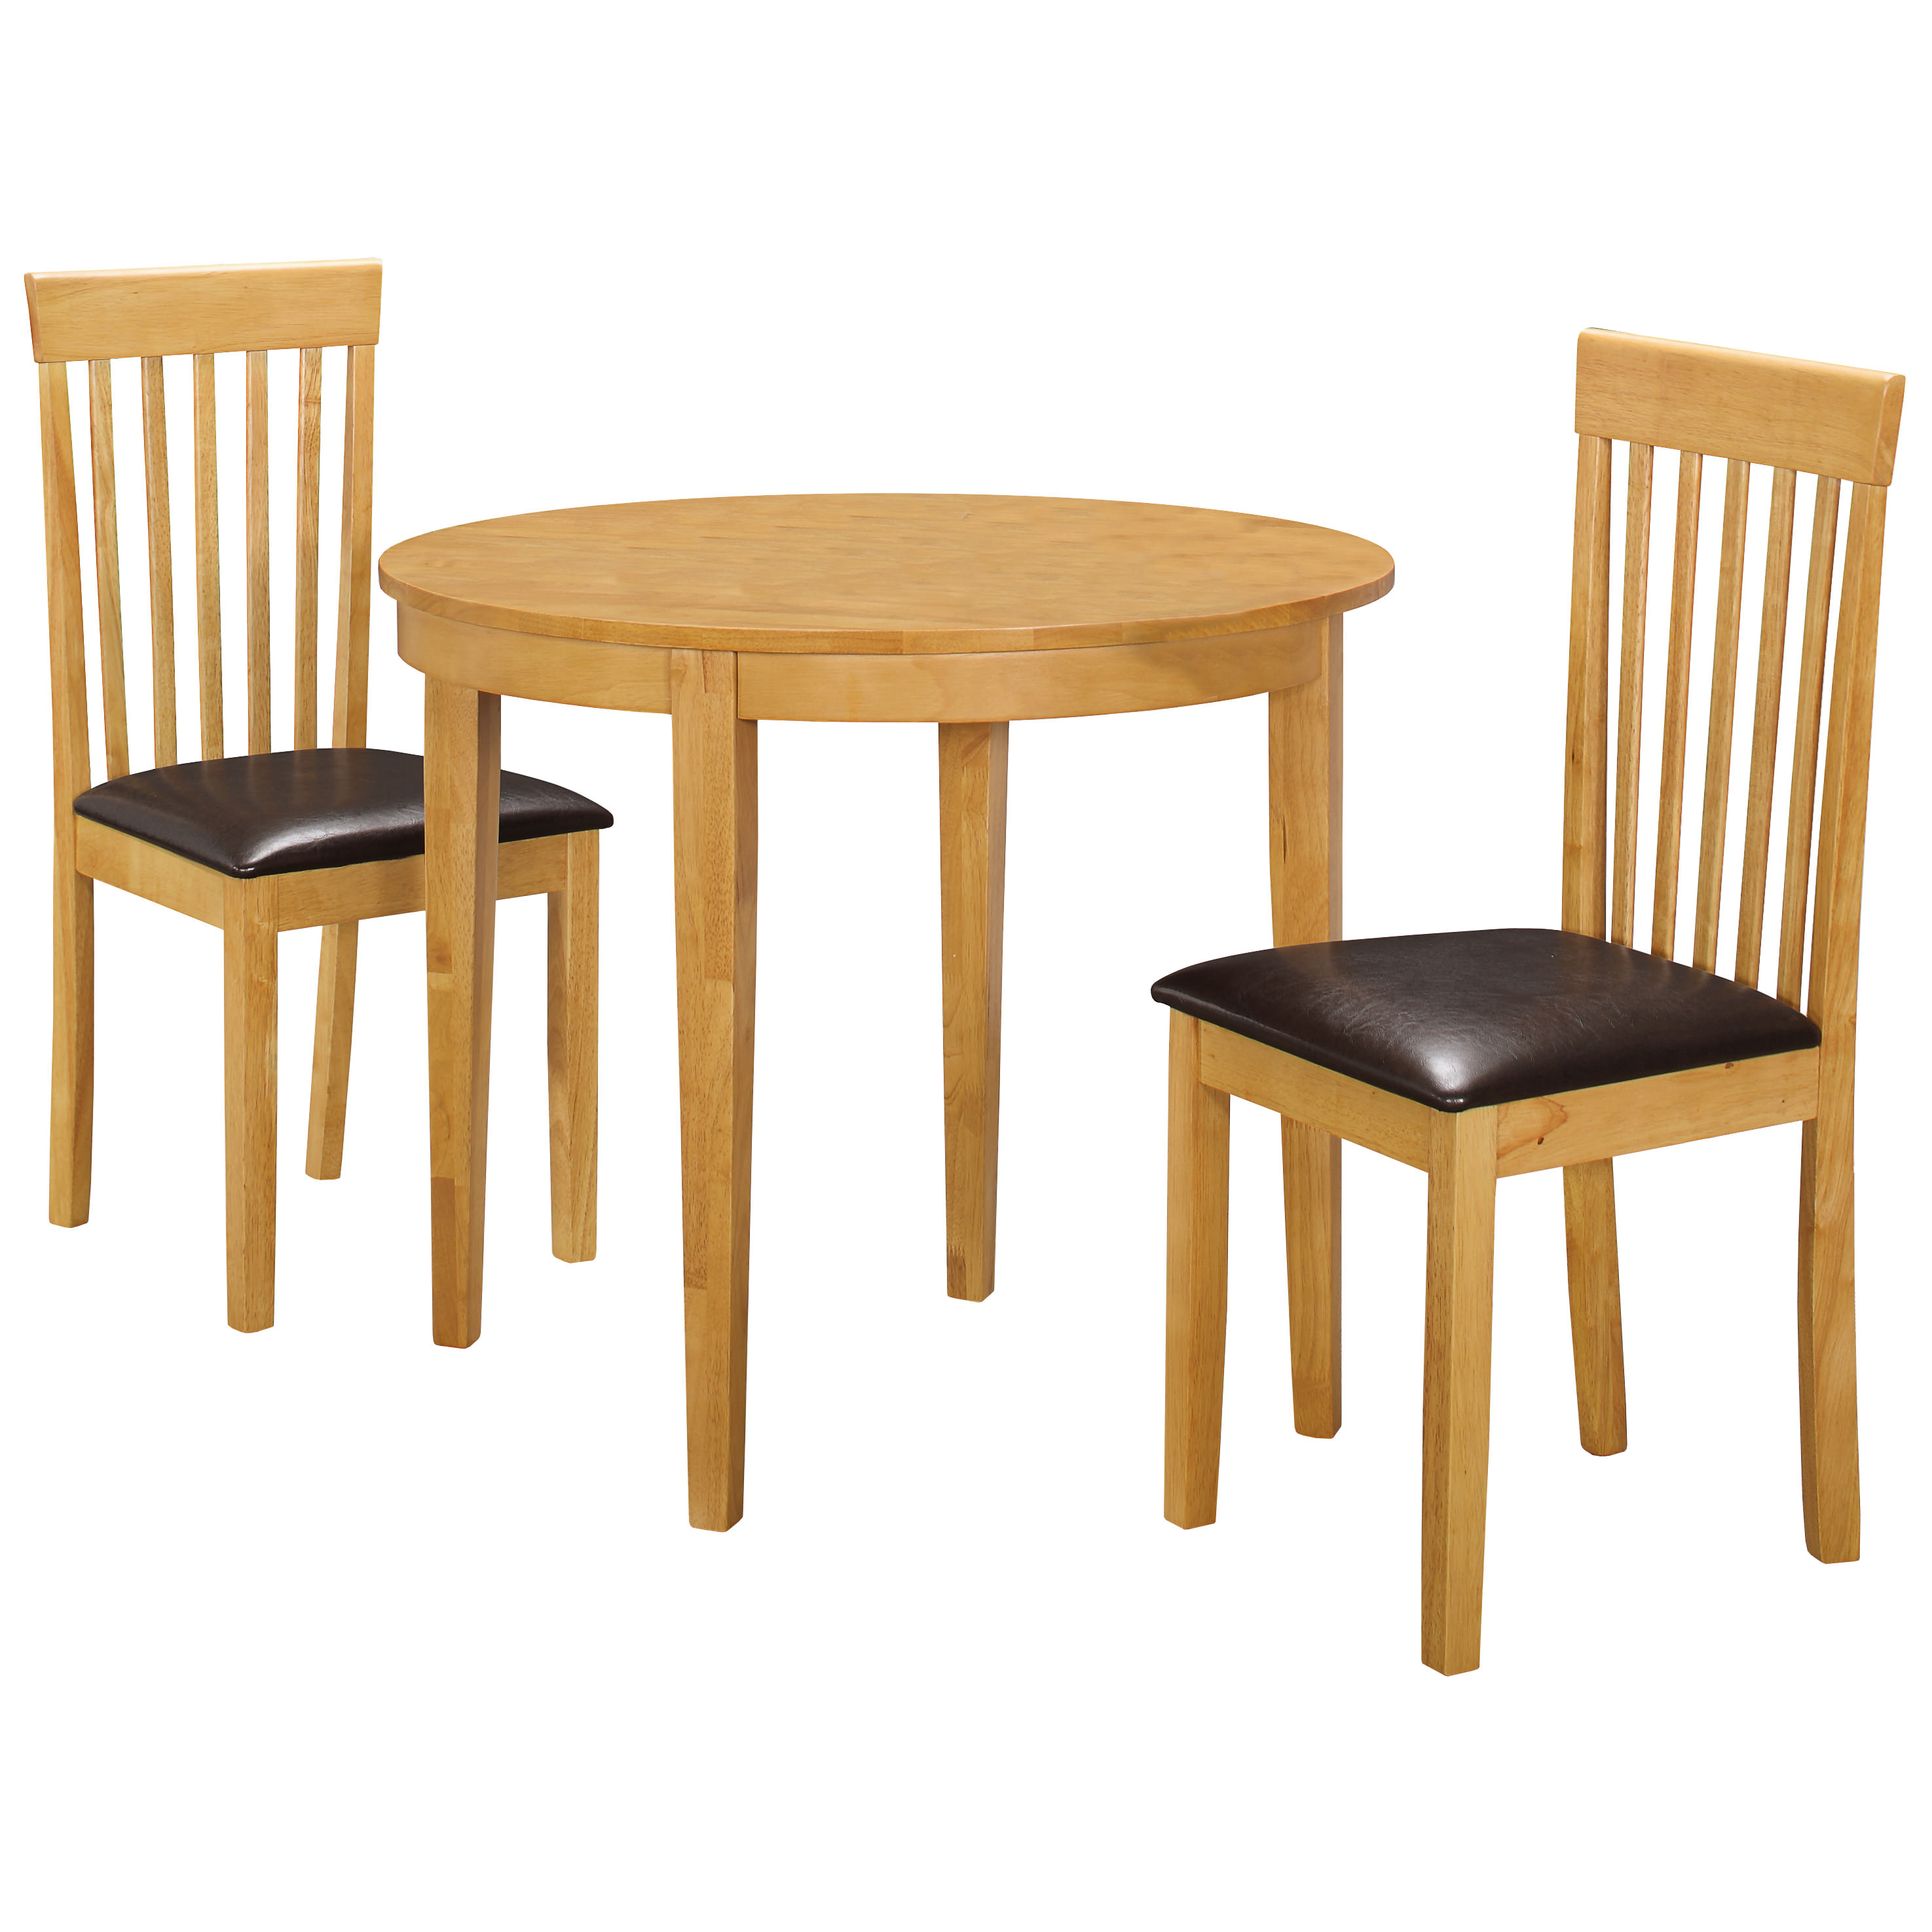 Round Extendable Dining Room Table And Chairs See More on | ToolCharts